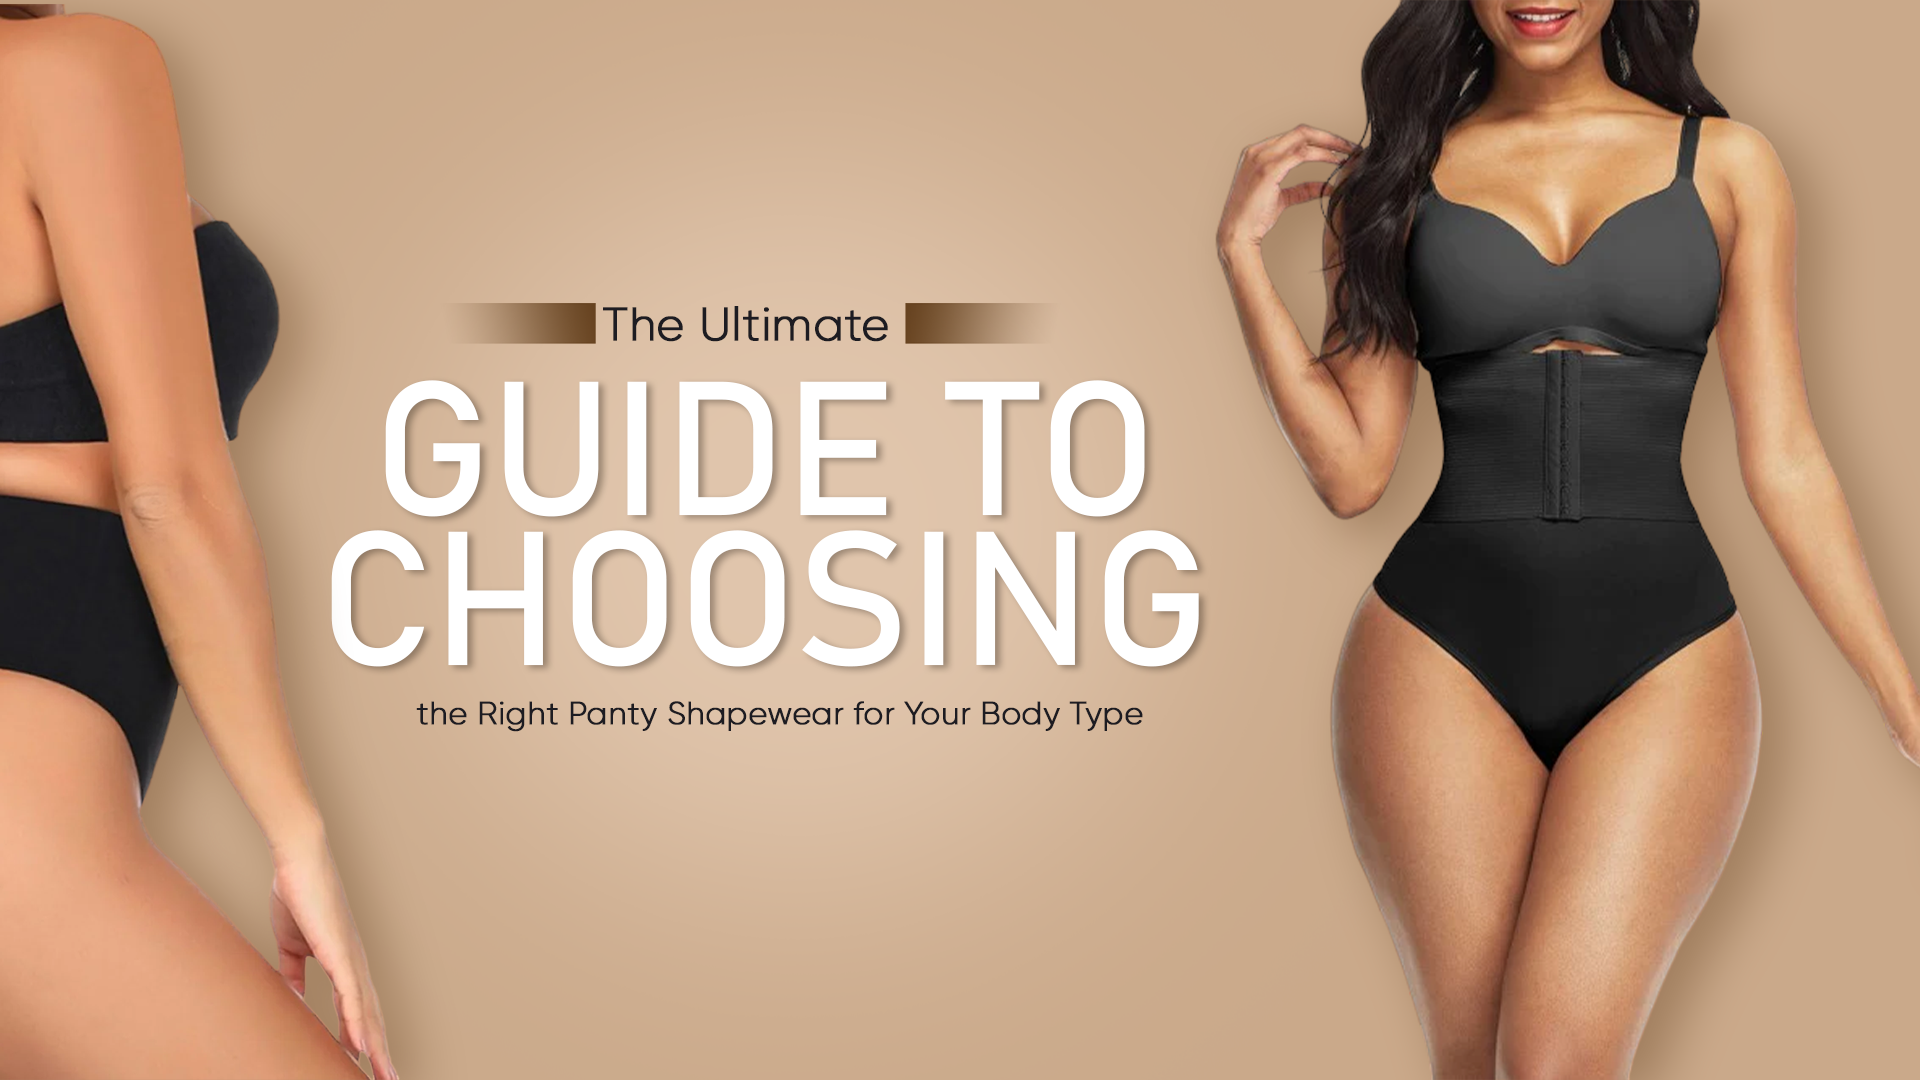 The Ultimate Guide to Choosing the Right Panty Shapewear for your Body Type